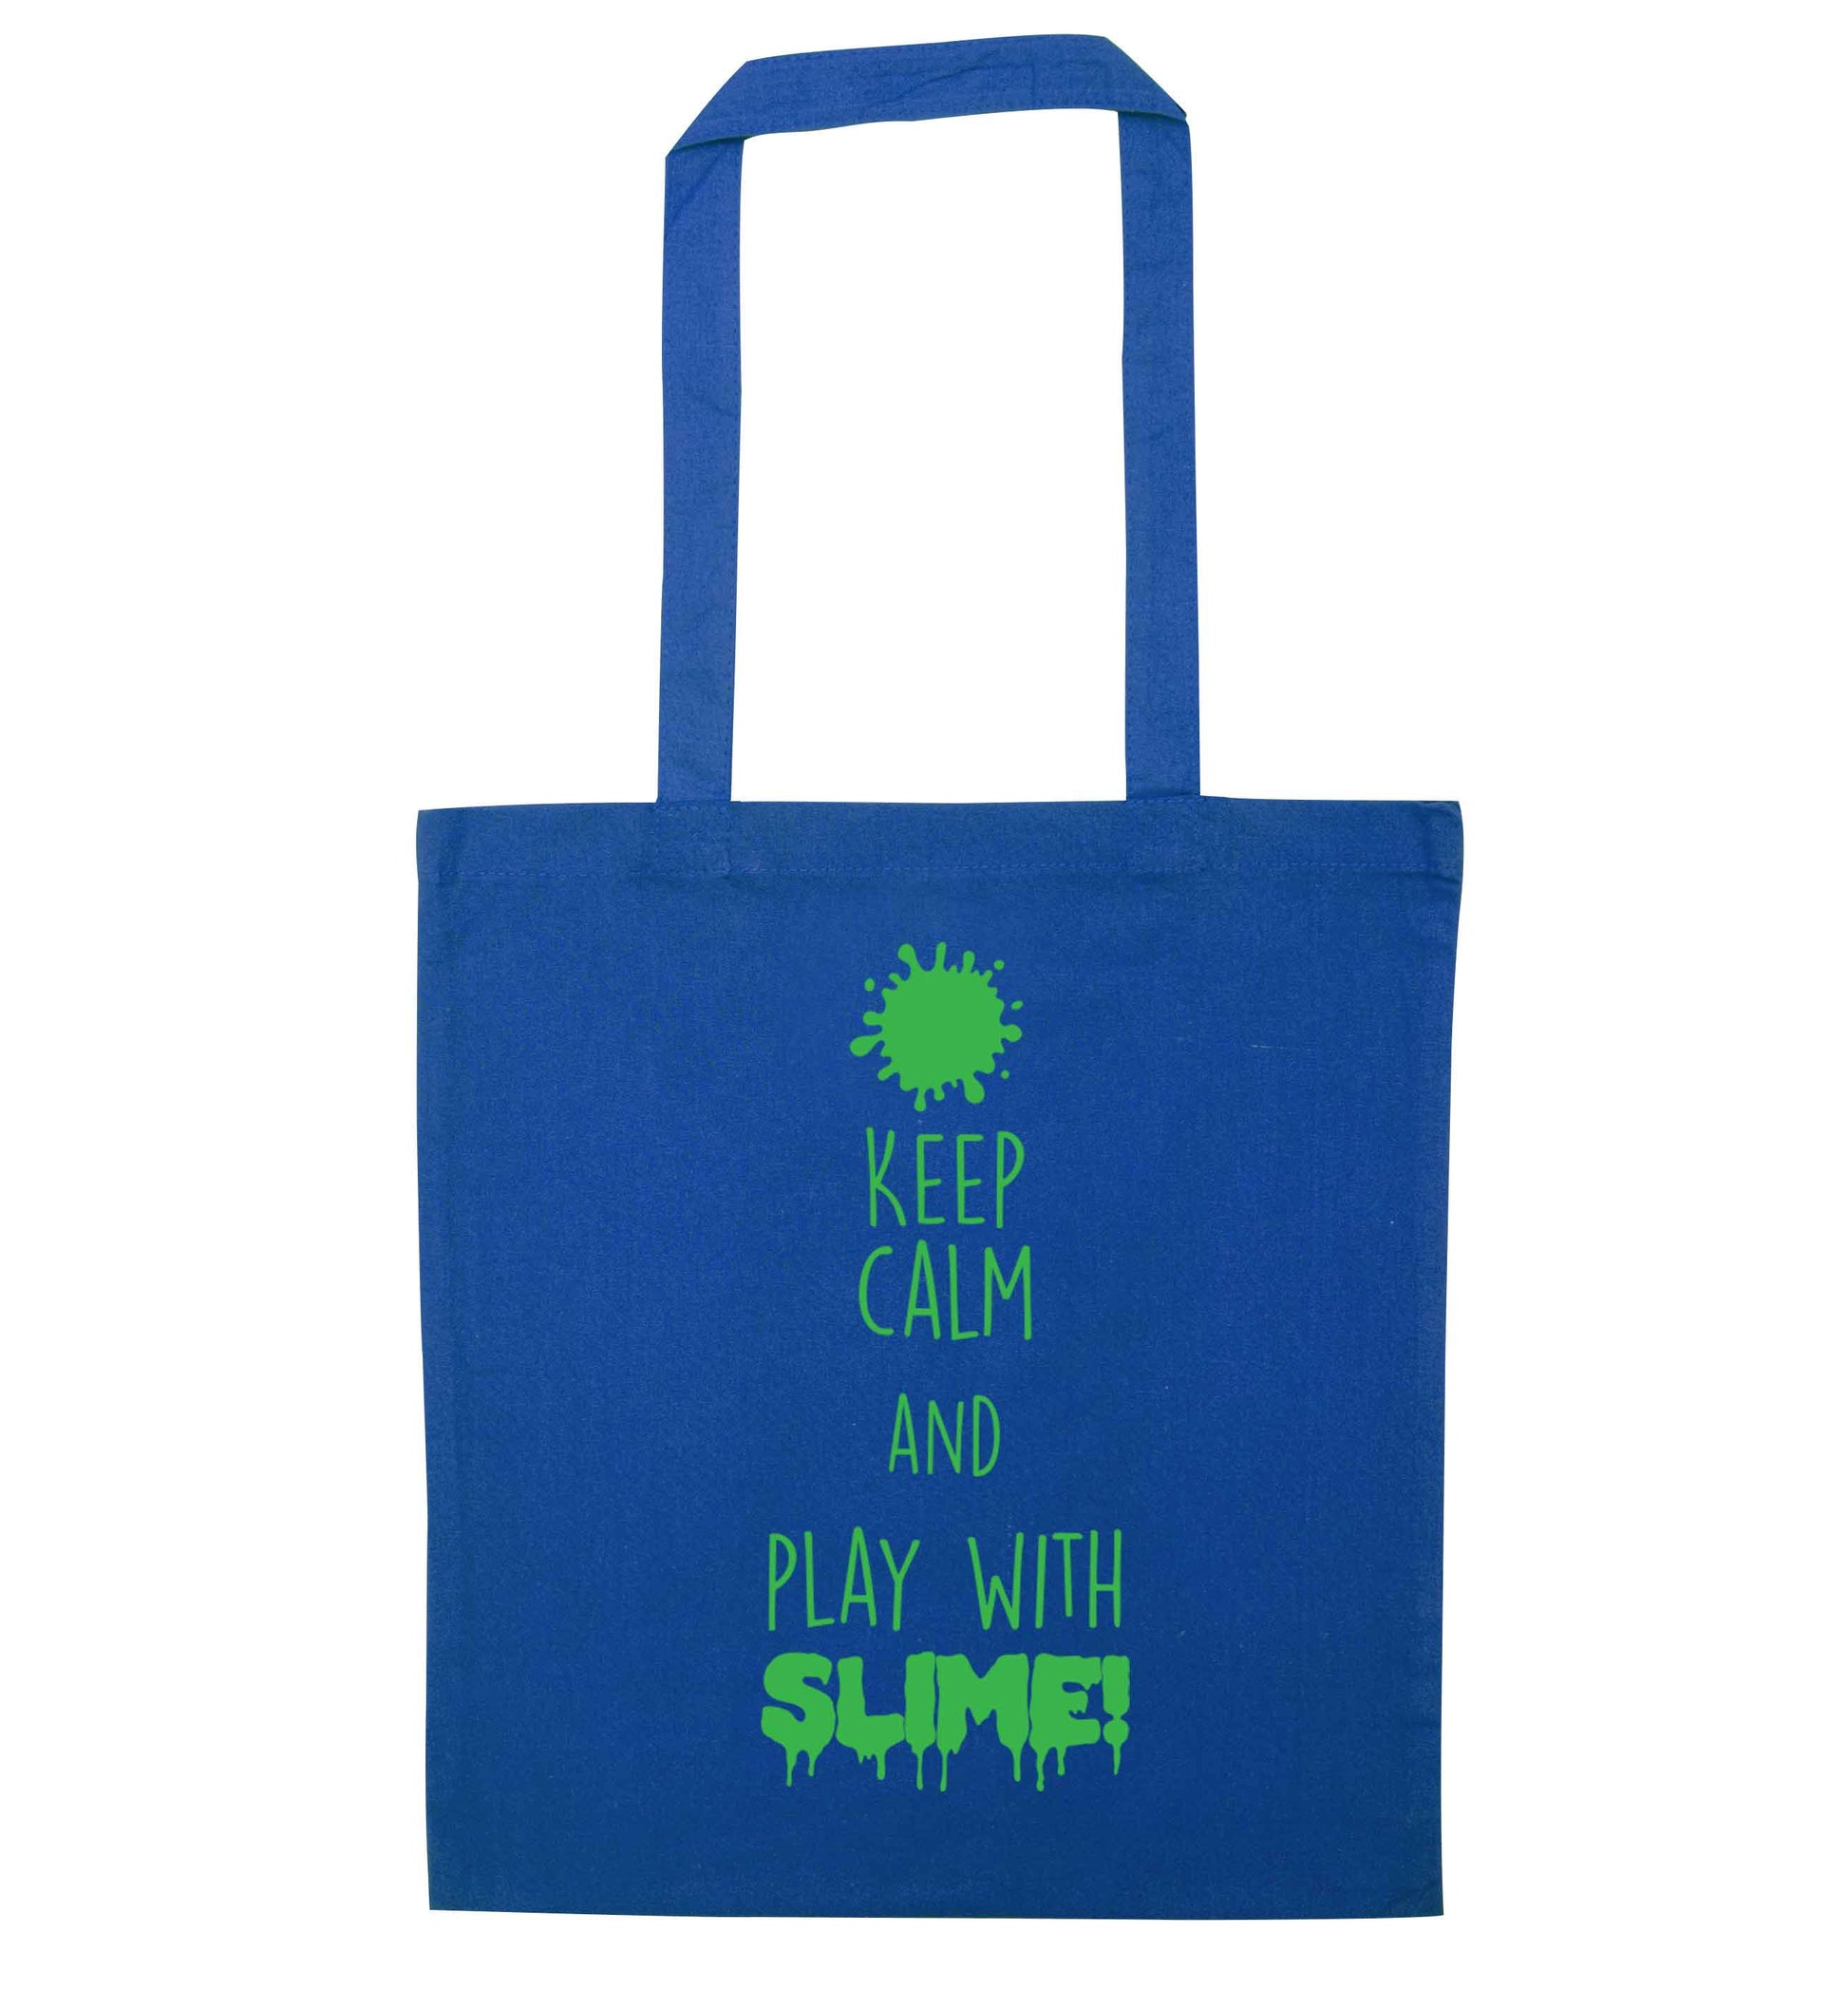 Neon green keep calm and play with slime!blue tote bag